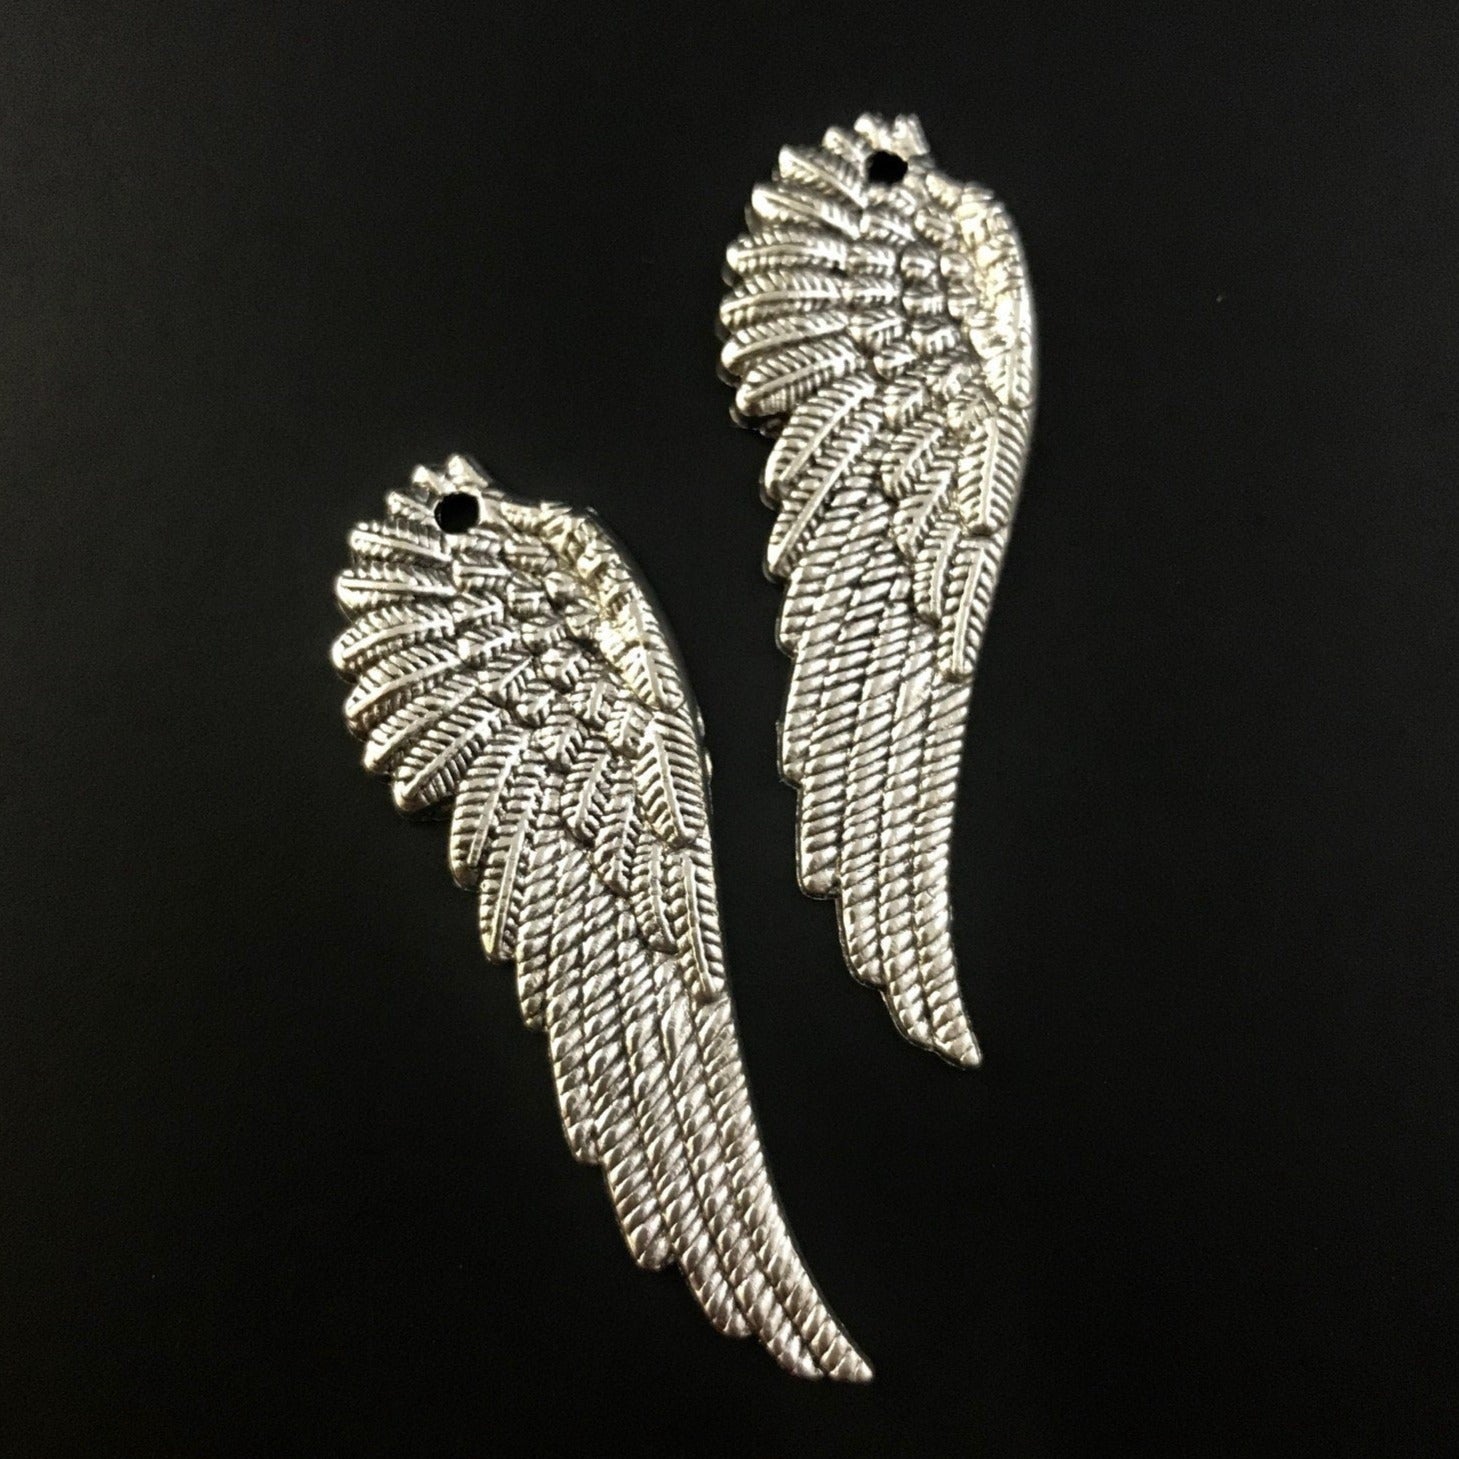 4 Wing Charms - Antique Silver and Bright Silver